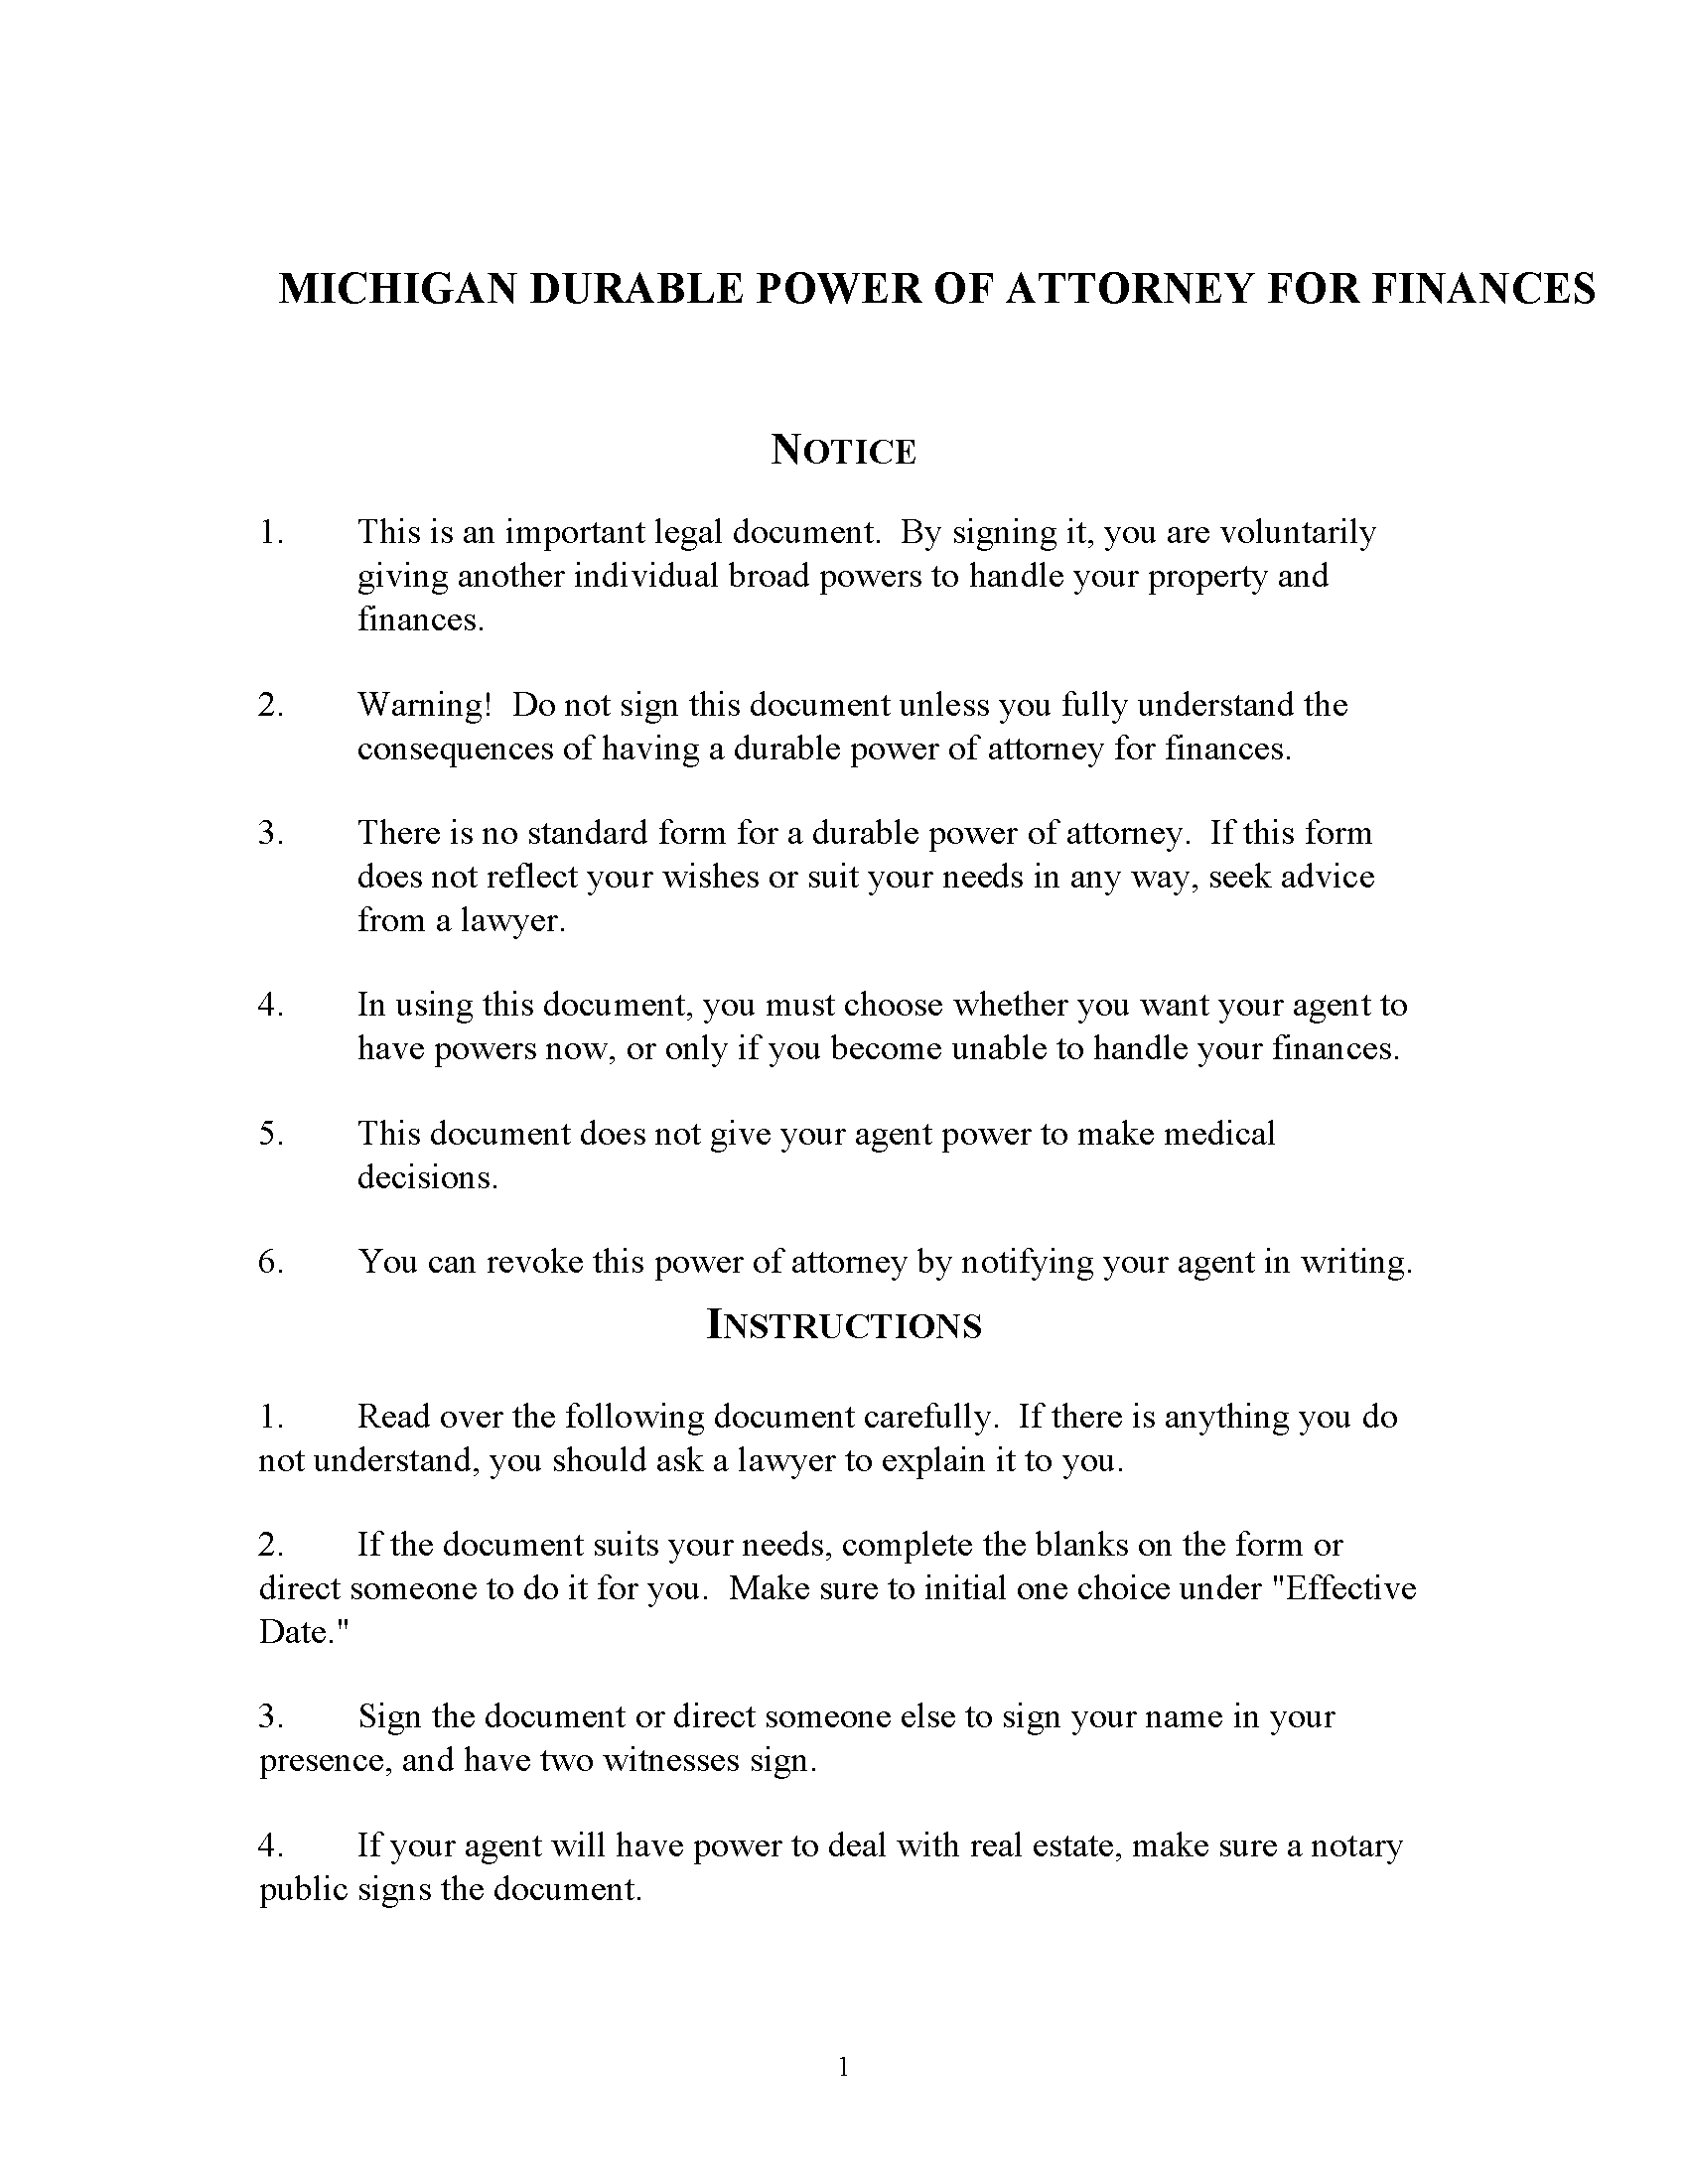 general-durable-power-of-attorney-form-michigan-free-download